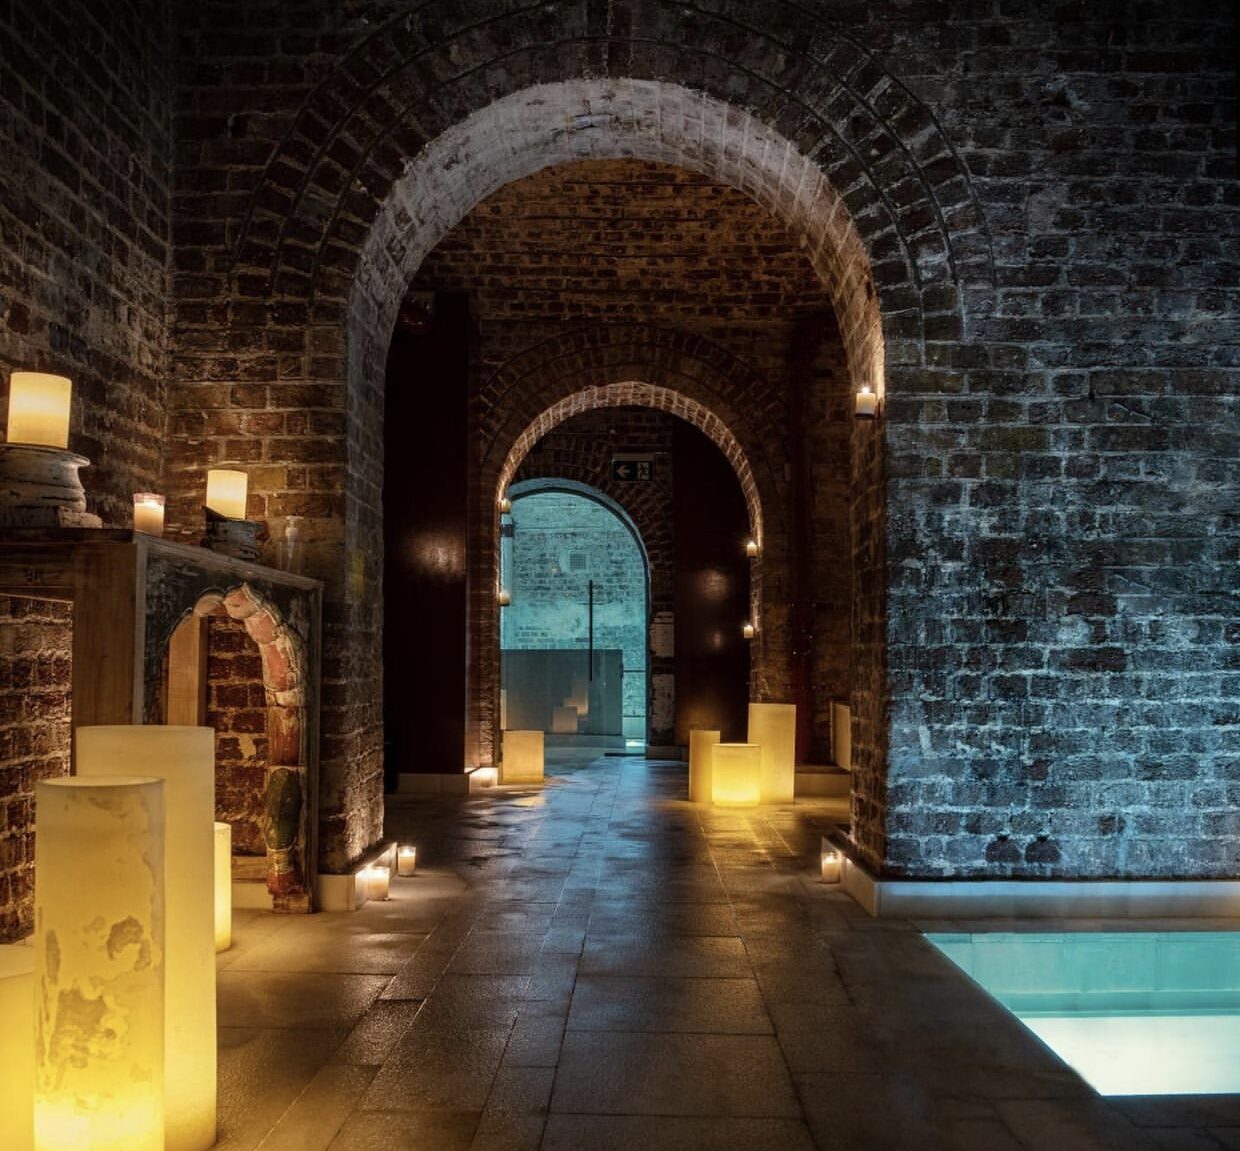 https://thenudge.com/london-things-to-do/aire-ancient-baths/